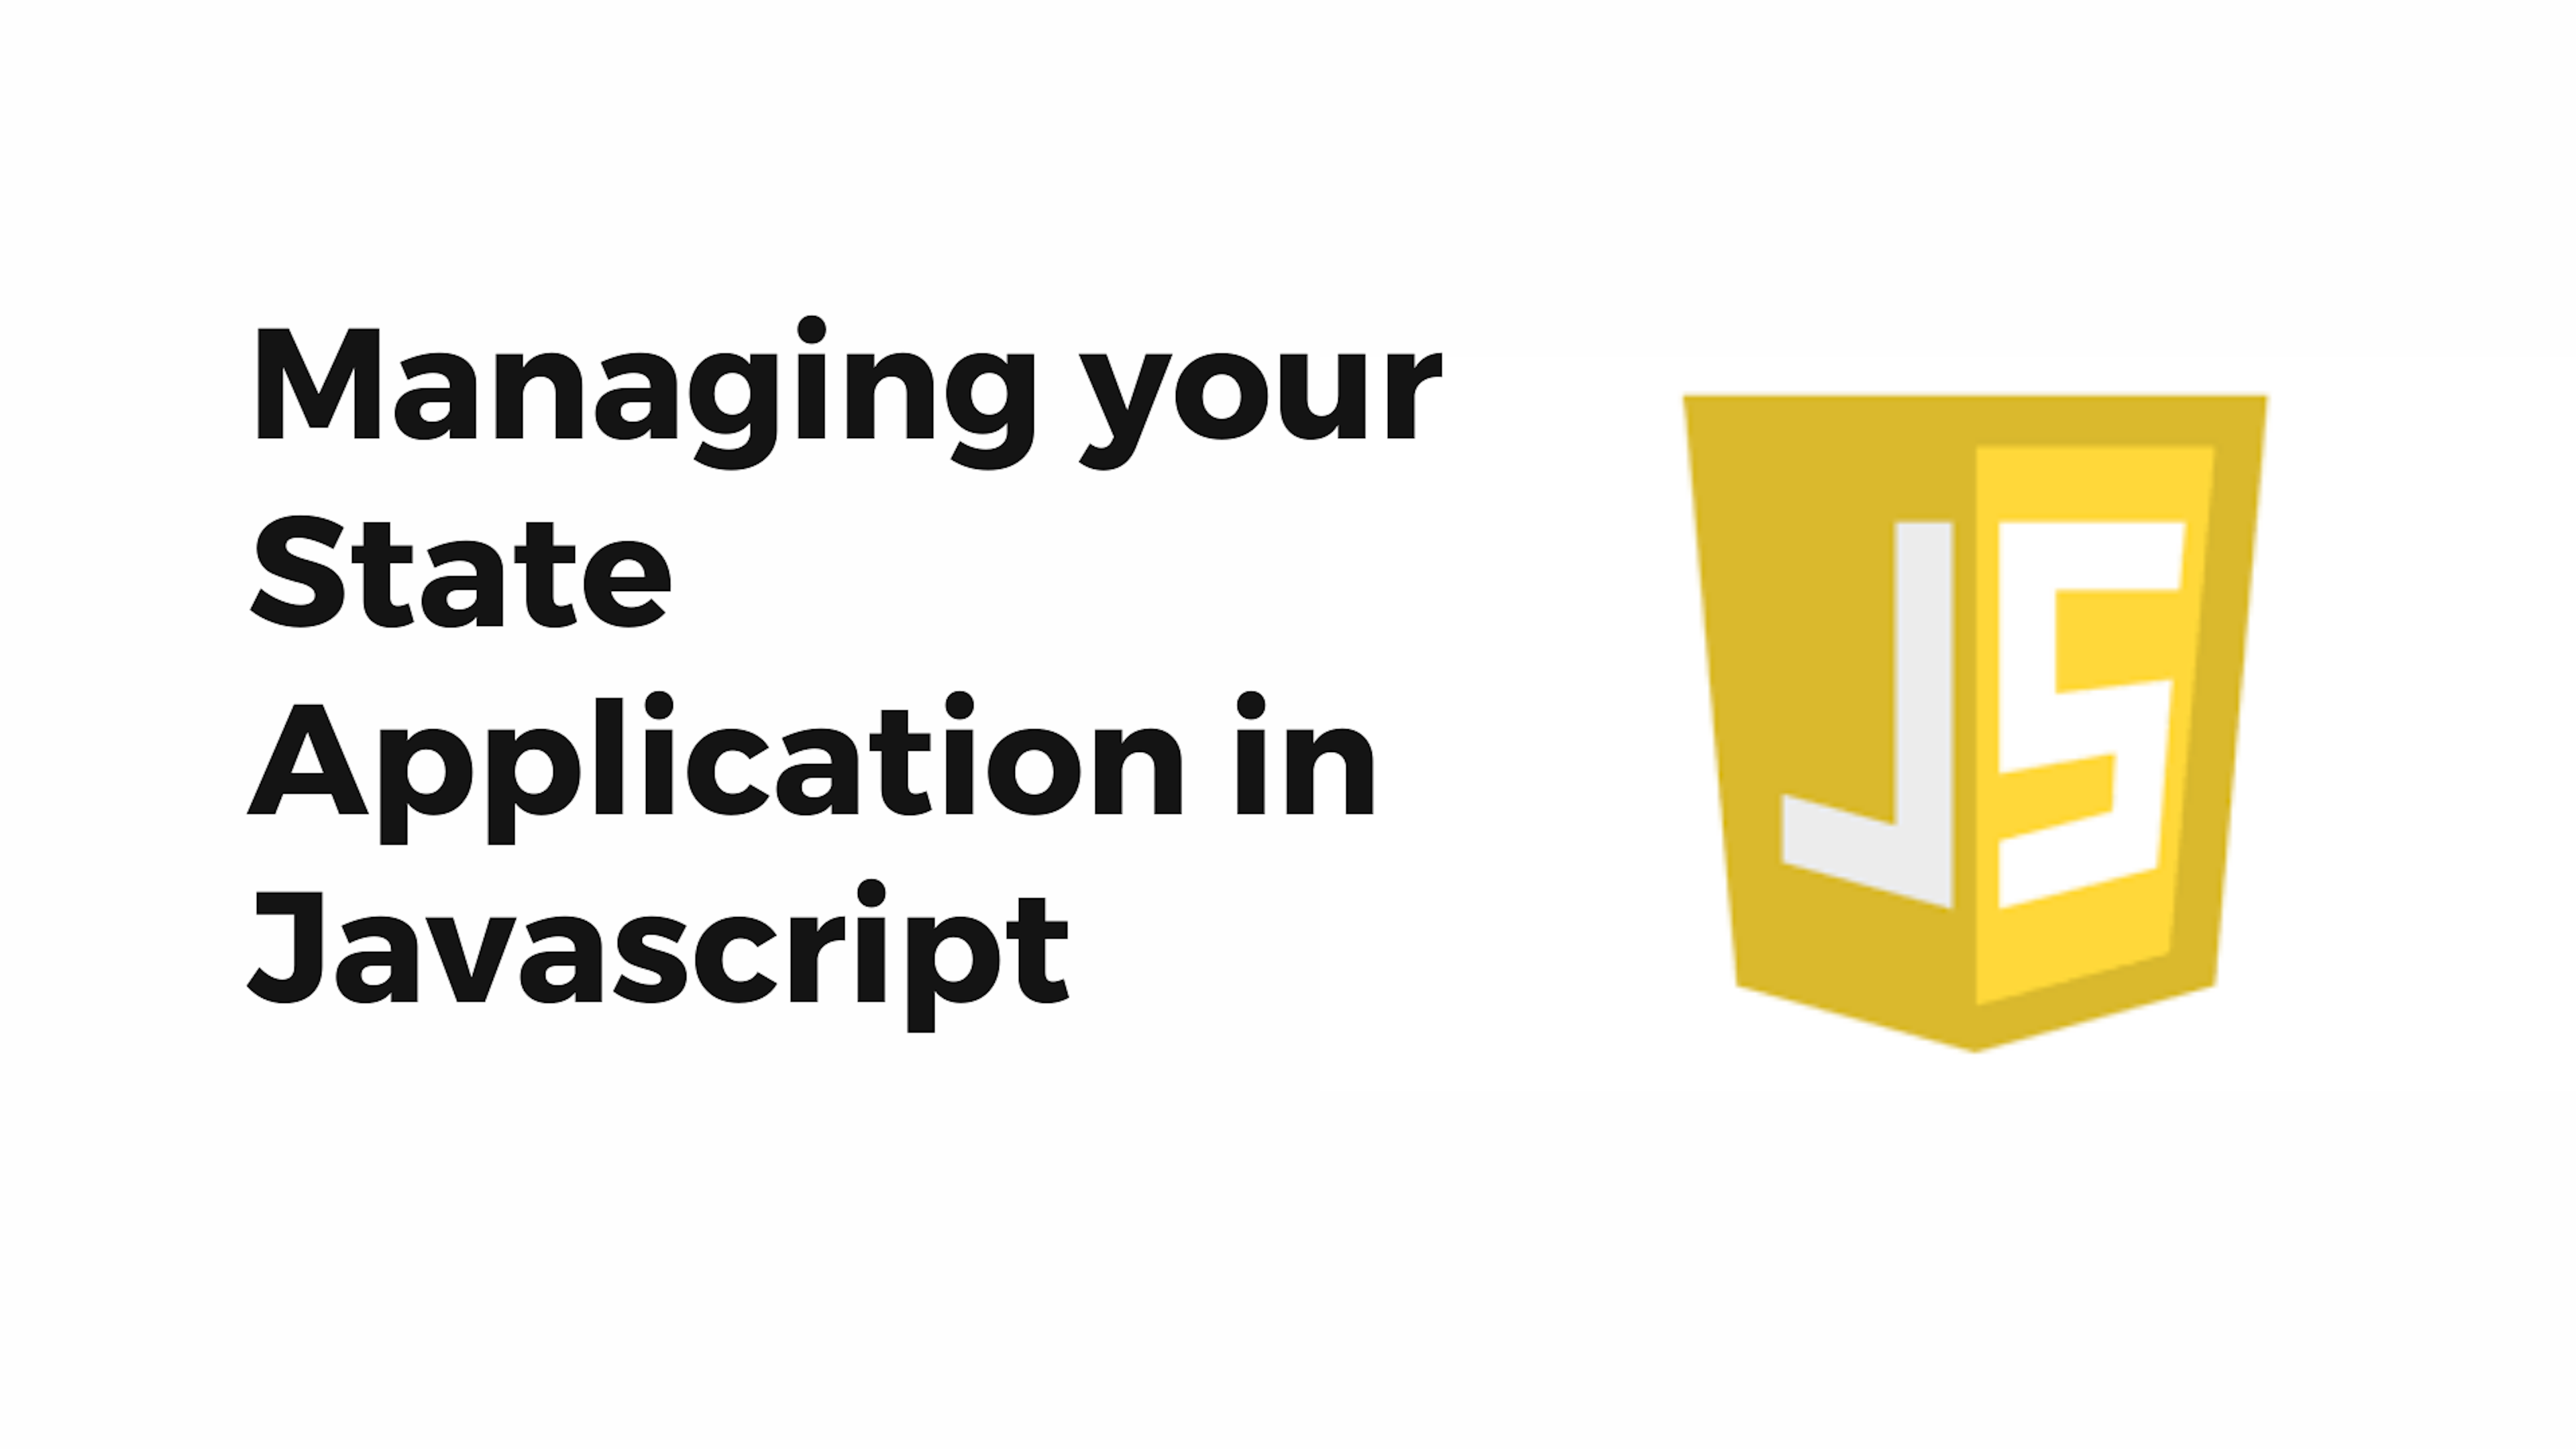 Managing your State Application in Javascript